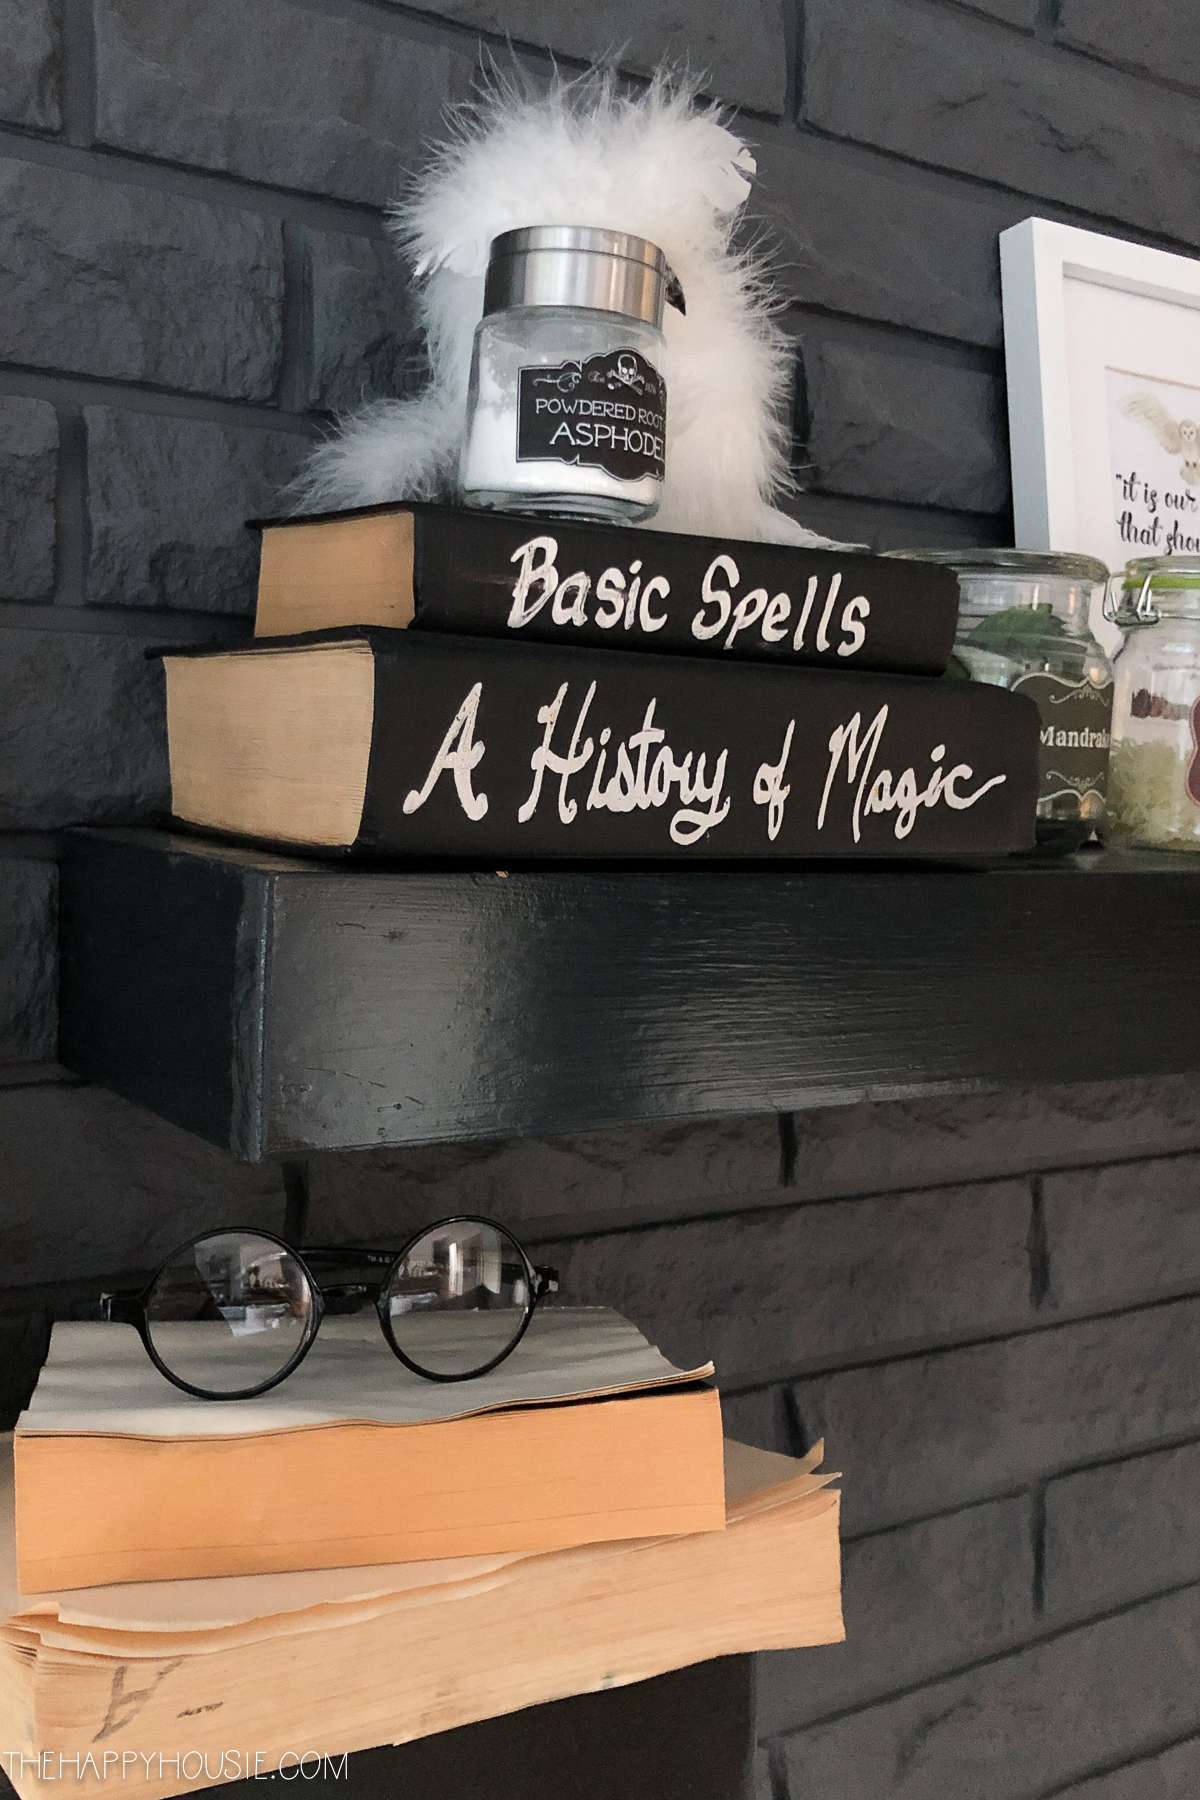 There are Harry Potter glasses sitting on the books.